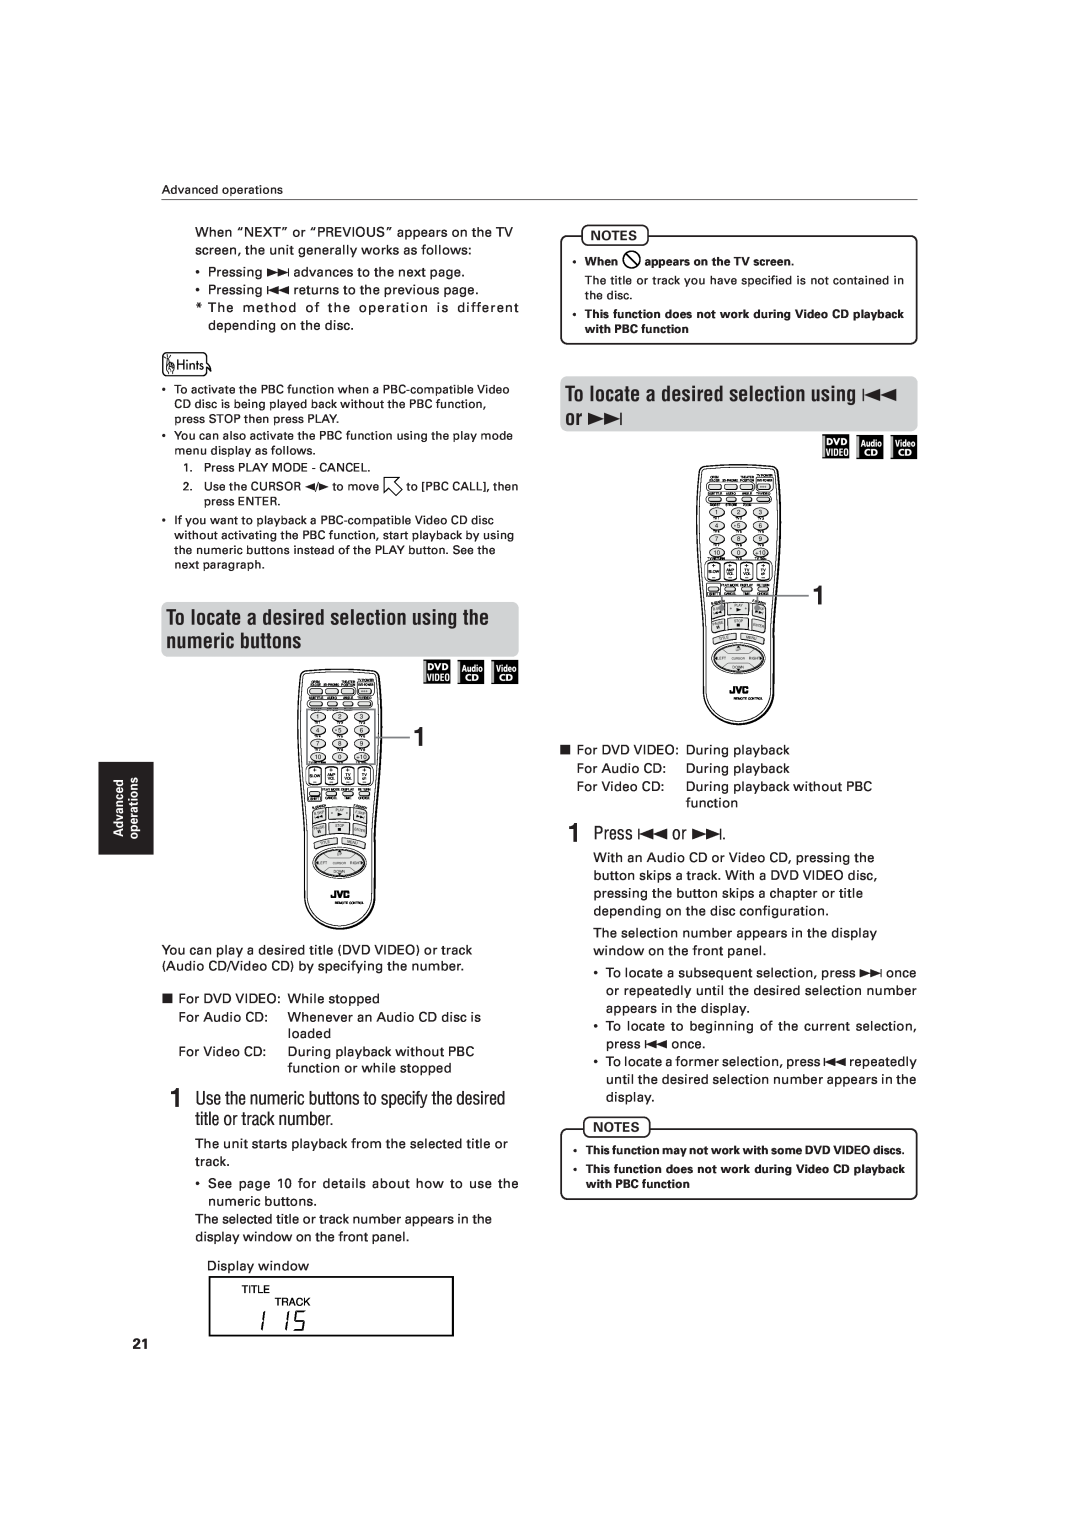 JVC XV-521BK manual To locate a desired selection using the numeric buttons, To locate a desired selection using 4 or ¢ 